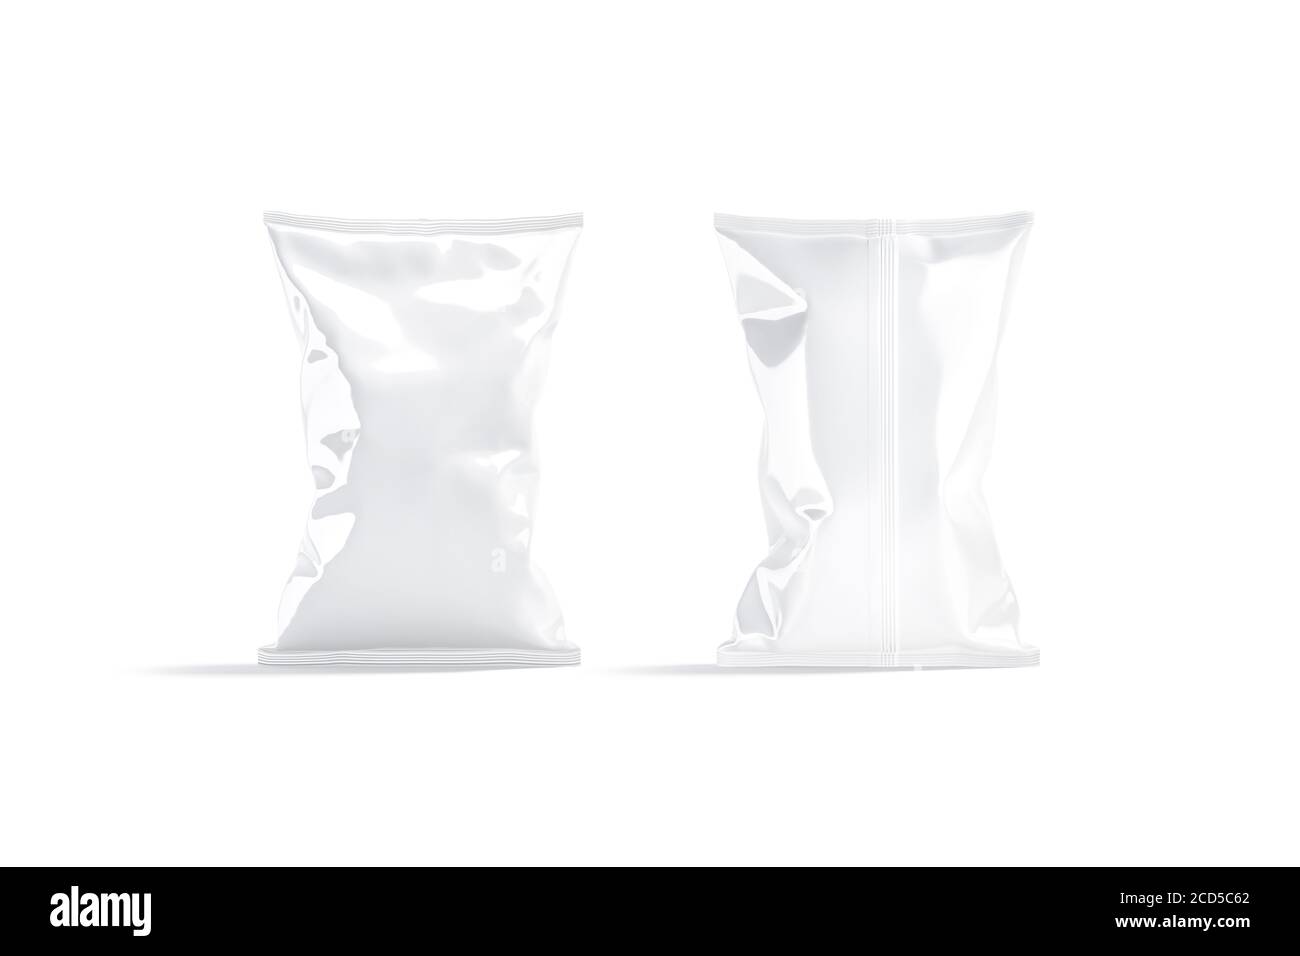 Blank white foil big chips pack mockup, front back view Stock Photo